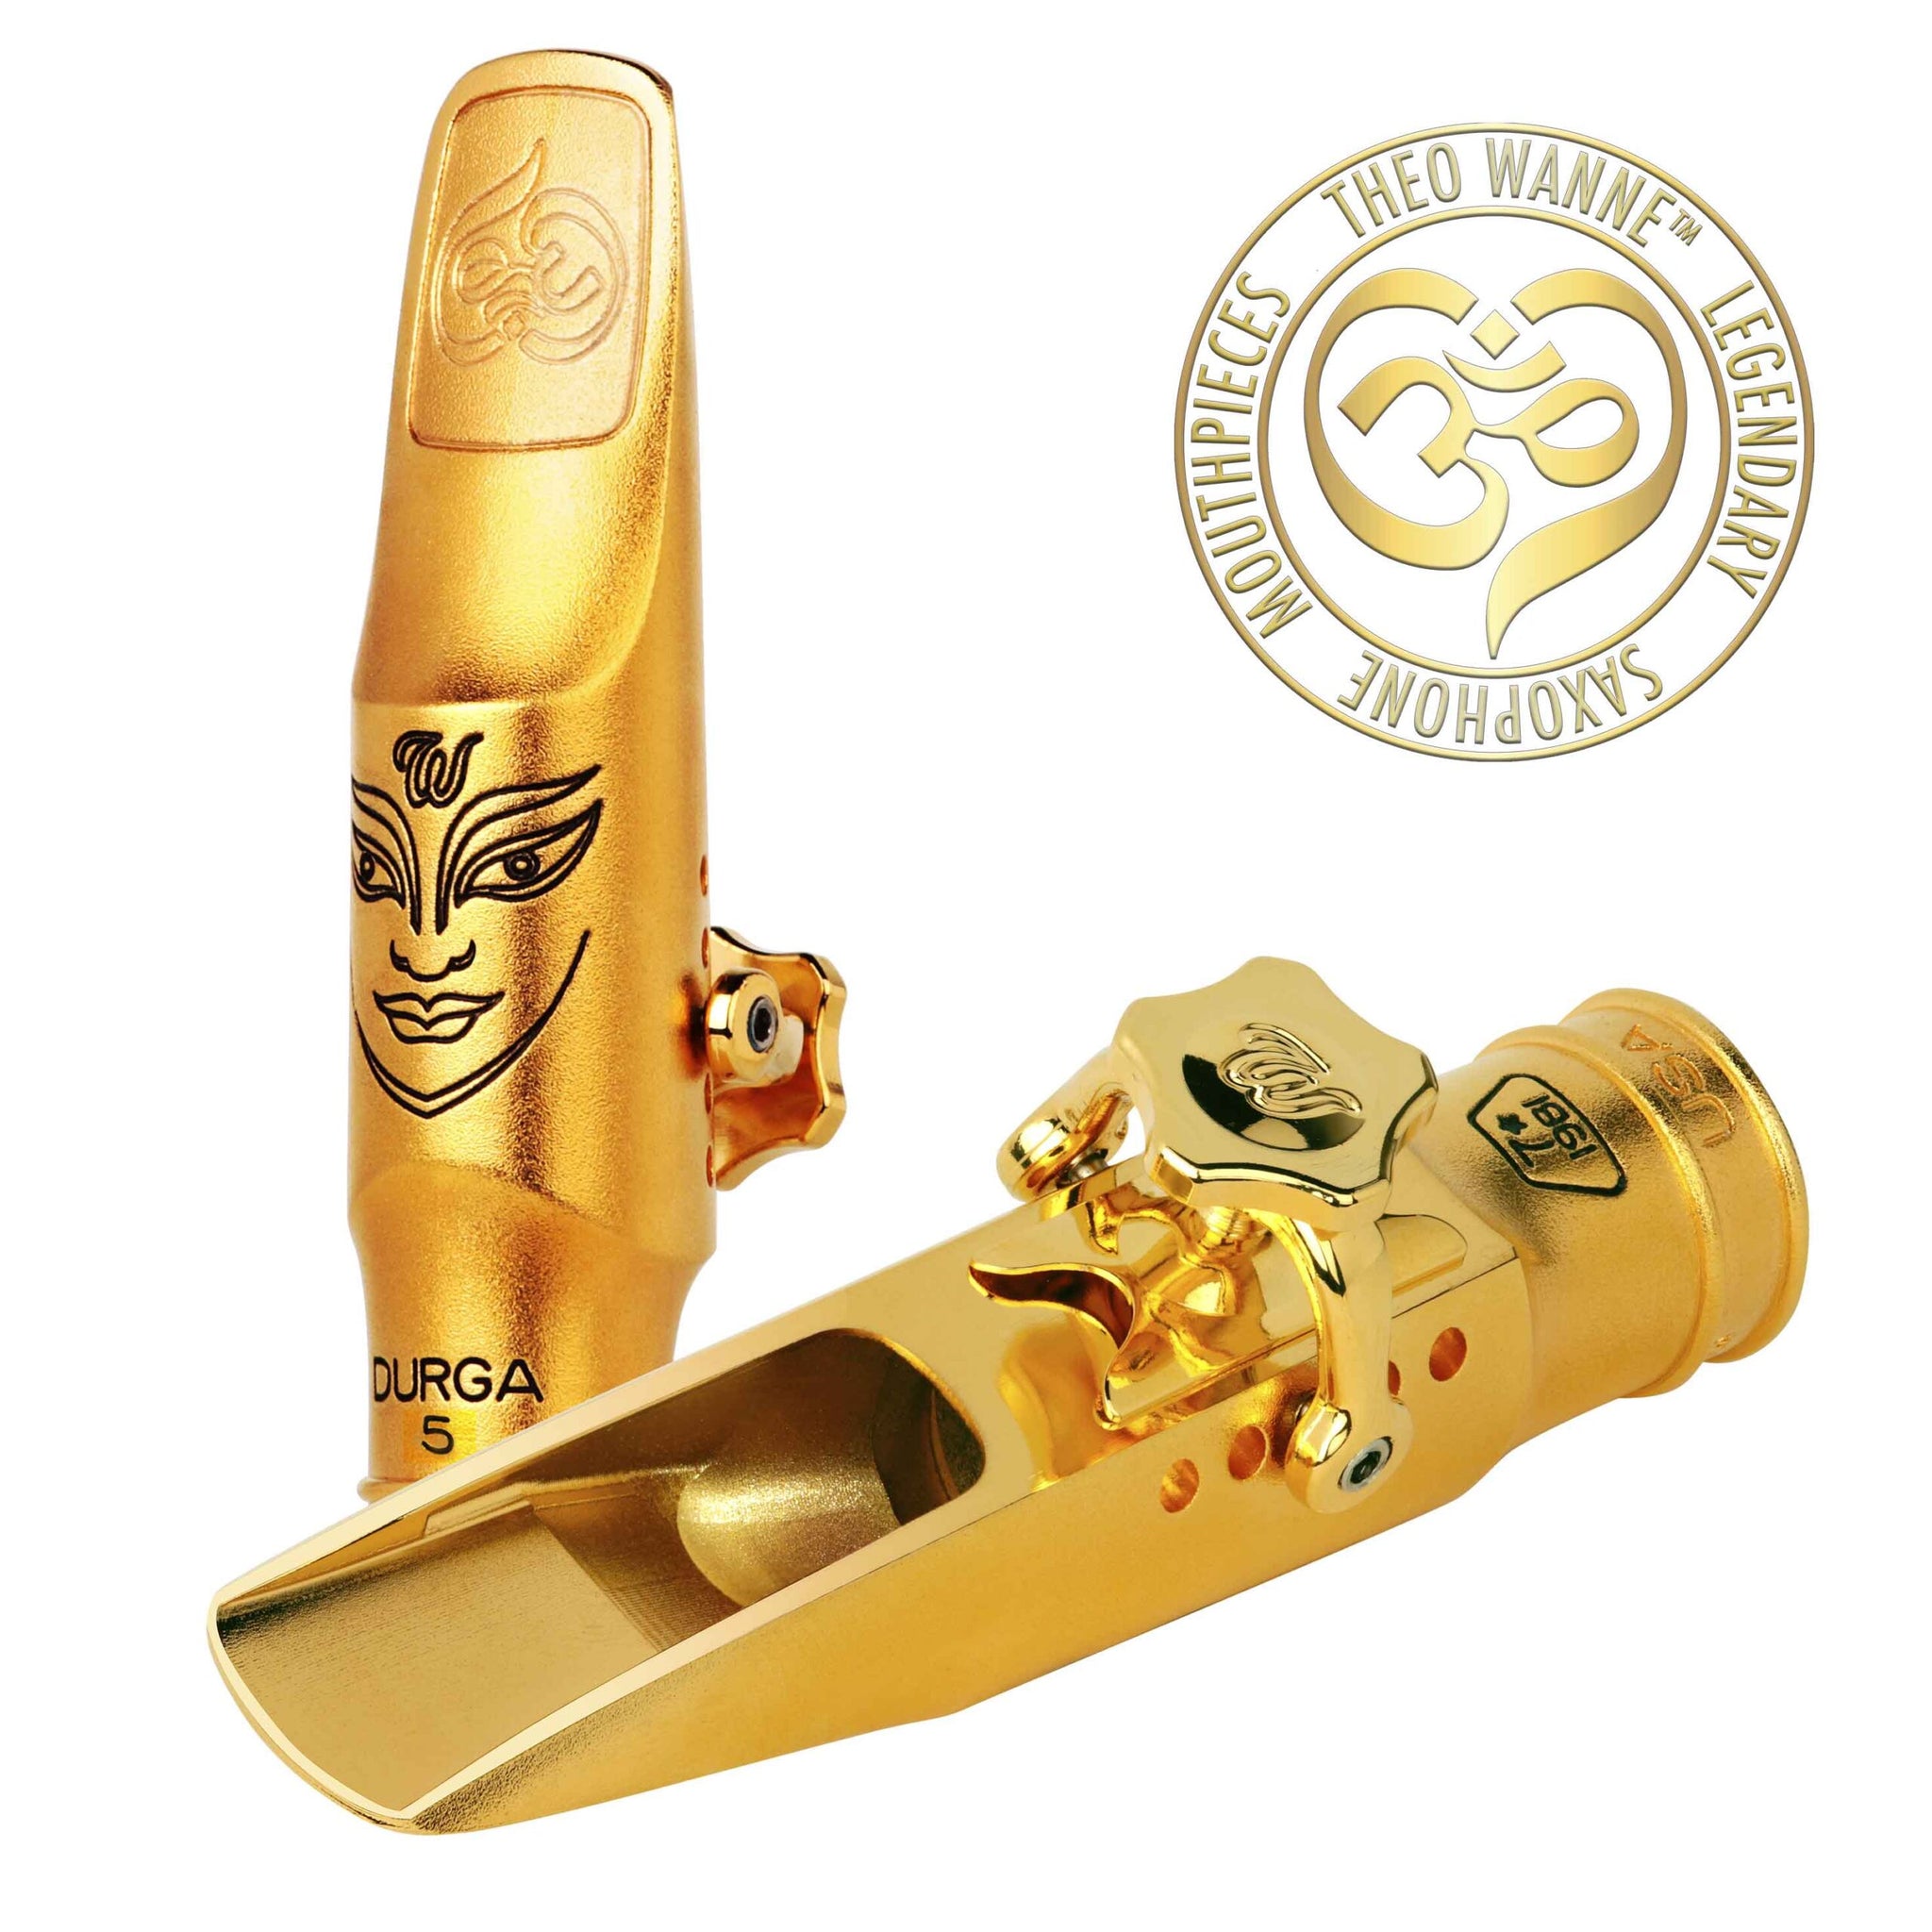 Theo Wanne GAIA 4 Tenor Sax Mouthpiece in Gold Plate